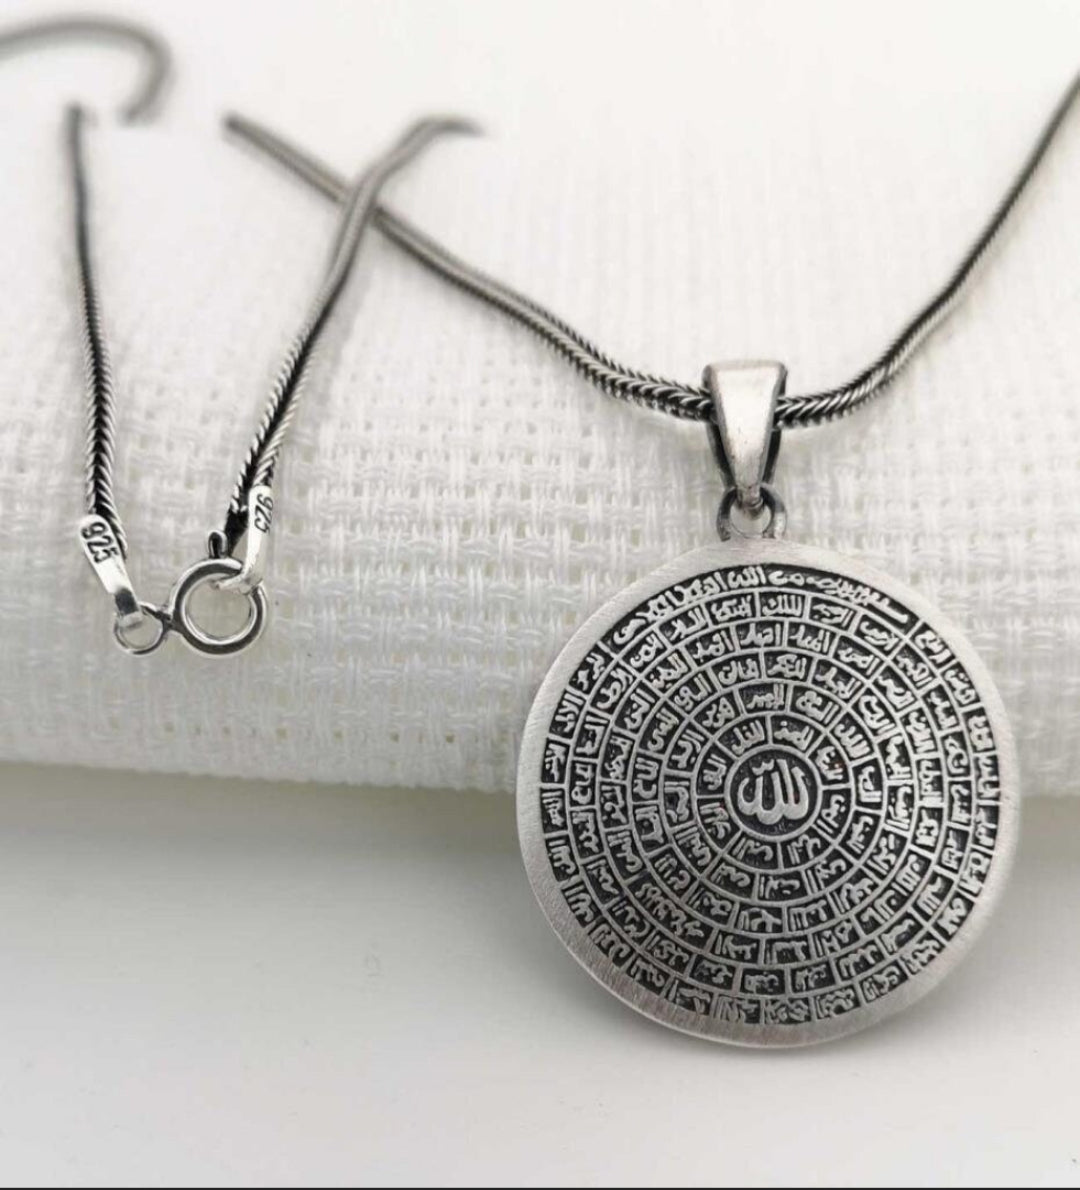 RARE PRINCE by CARAT SUTRA | Unique Designed 99 Names of Allah Engraved Pendant | 925 Sterling Silver Pendant | Men's Jewelry | With Certificate of Authenticity and 925 Hallmark - caratsutra